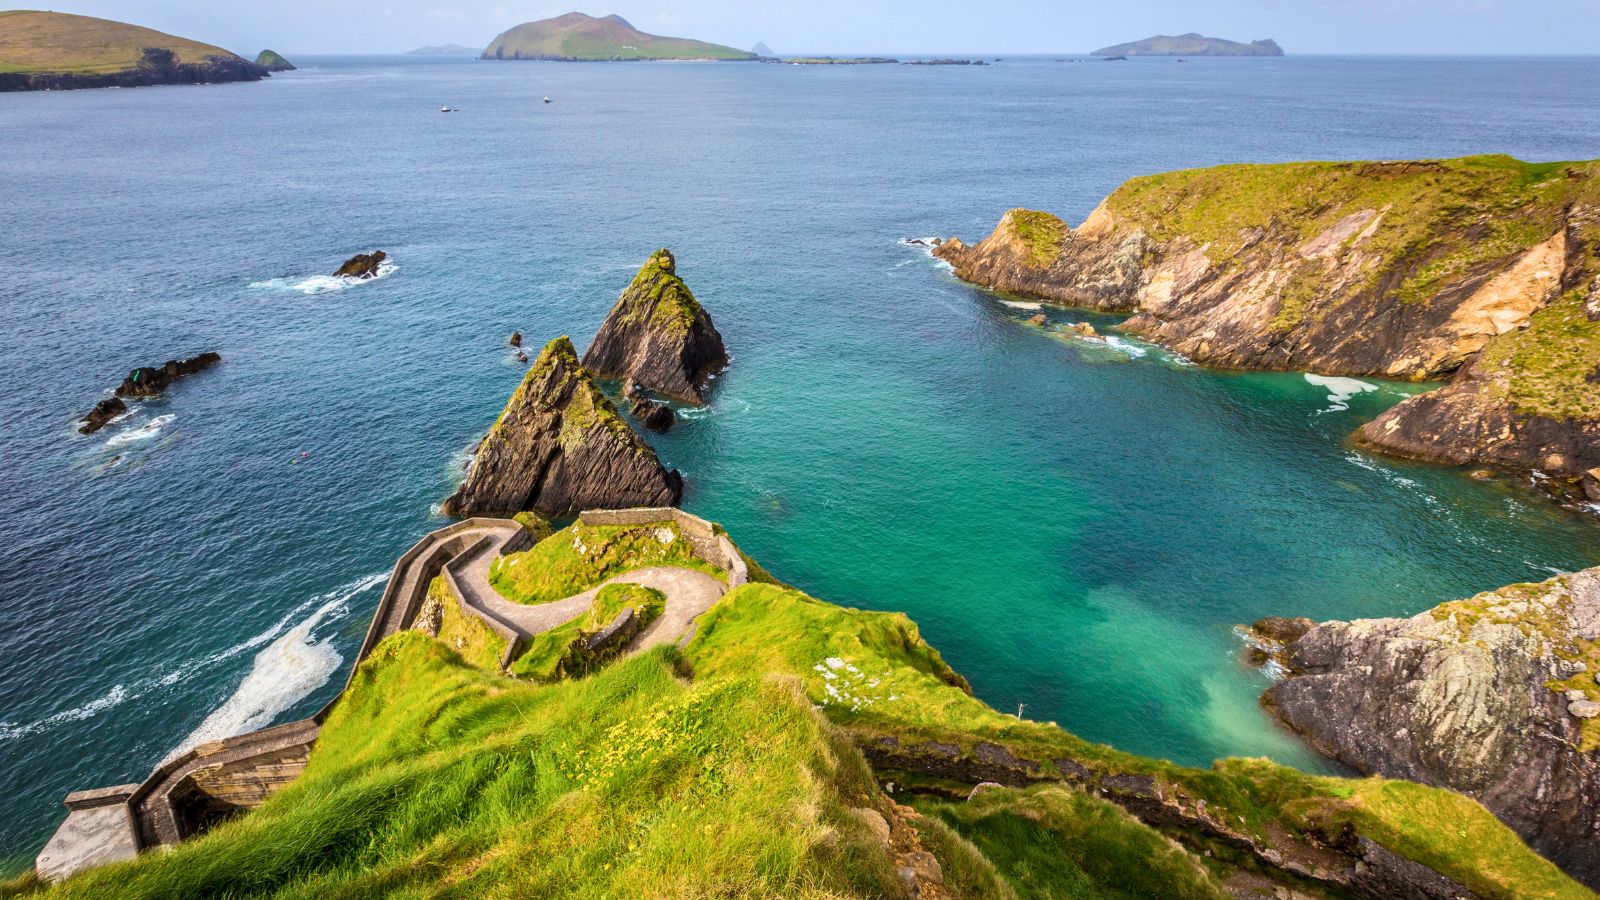 <p>Located on the southwest Atlantic coast, the Dingle Peninsula lives up to its reputation as one of Ireland’s most stunning destinations. It’s raw, rugged, and windswept, with jagged cliffs, verdant hillsides, sandy beaches, and turbulent waters.</p><p>Slea Head Drive on the Wild Atlantic Way is the route that takes you around the Dingle Peninsula. It’s a twisting, turning, and breath-taking loop that starts and finishes in Dingle Town. It’s undoubtedly one of the best things to do in Ireland.</p>